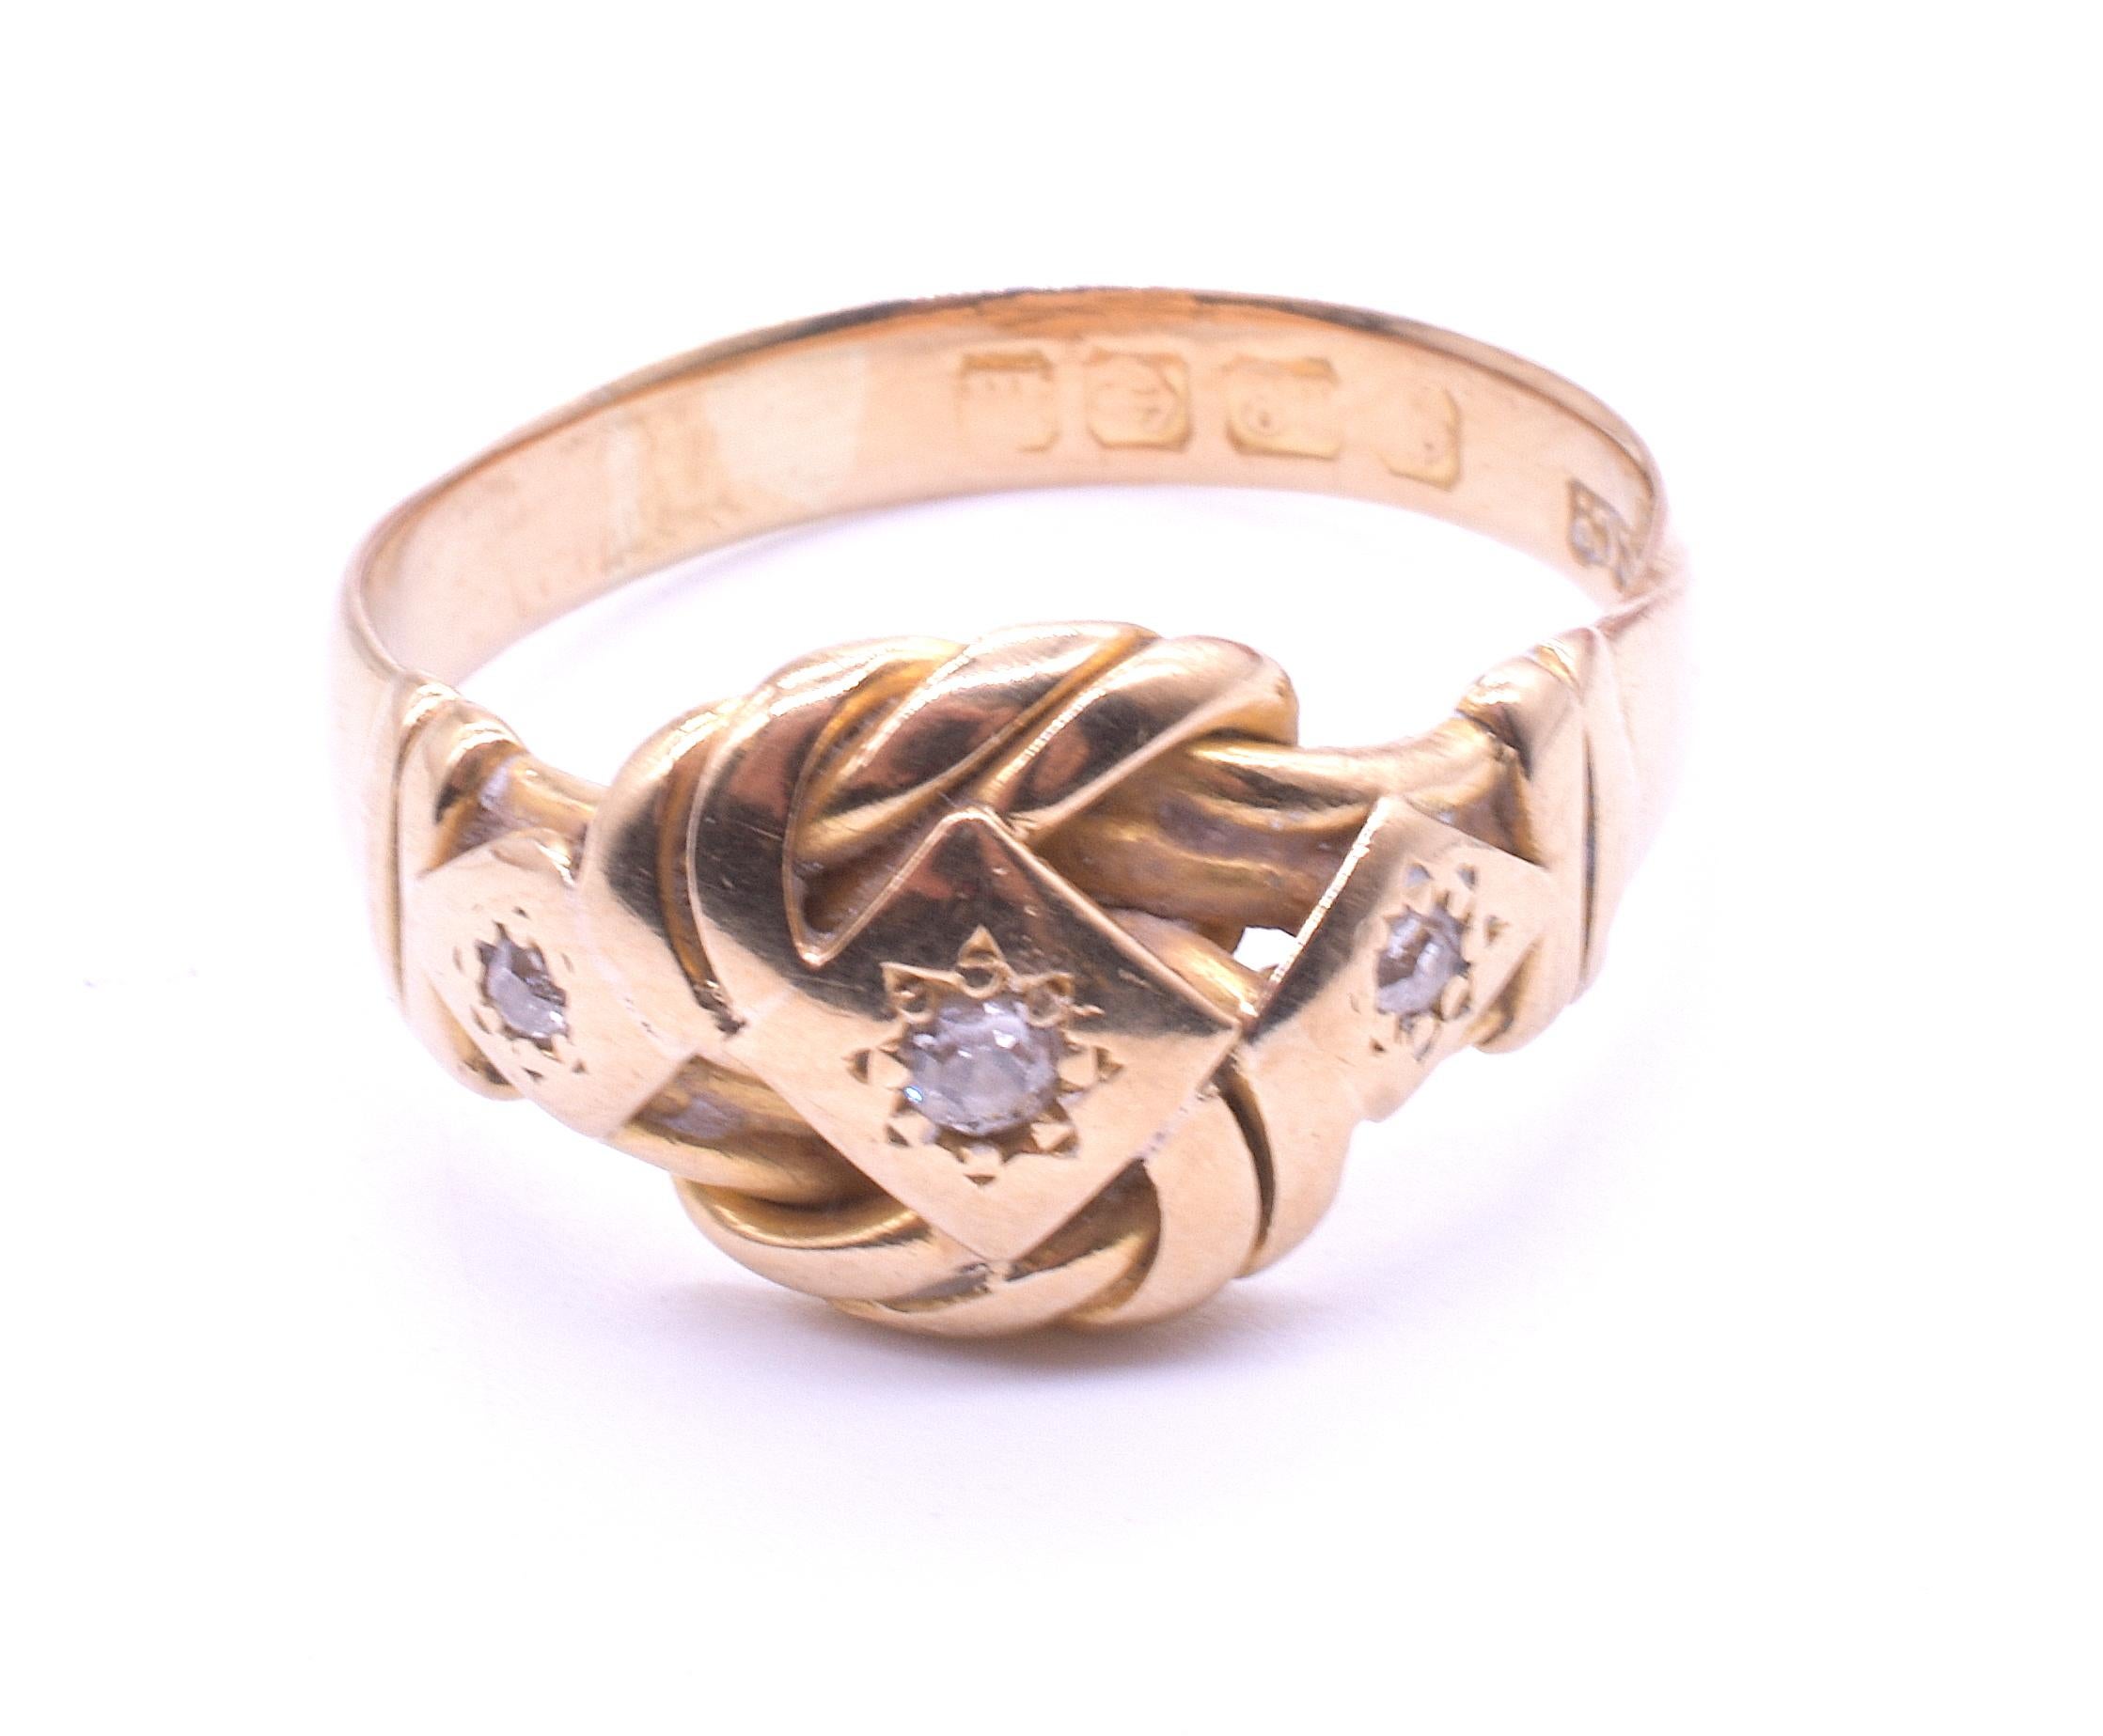 Antique 18K and diamond-studded lover's knot ring hallmarked for Birmingham, 1905. Lover's knots were a Victorian motif that continued in popularity through WWI. Our lover's knot ring has three old mine cut diamonds embedded securely within incised